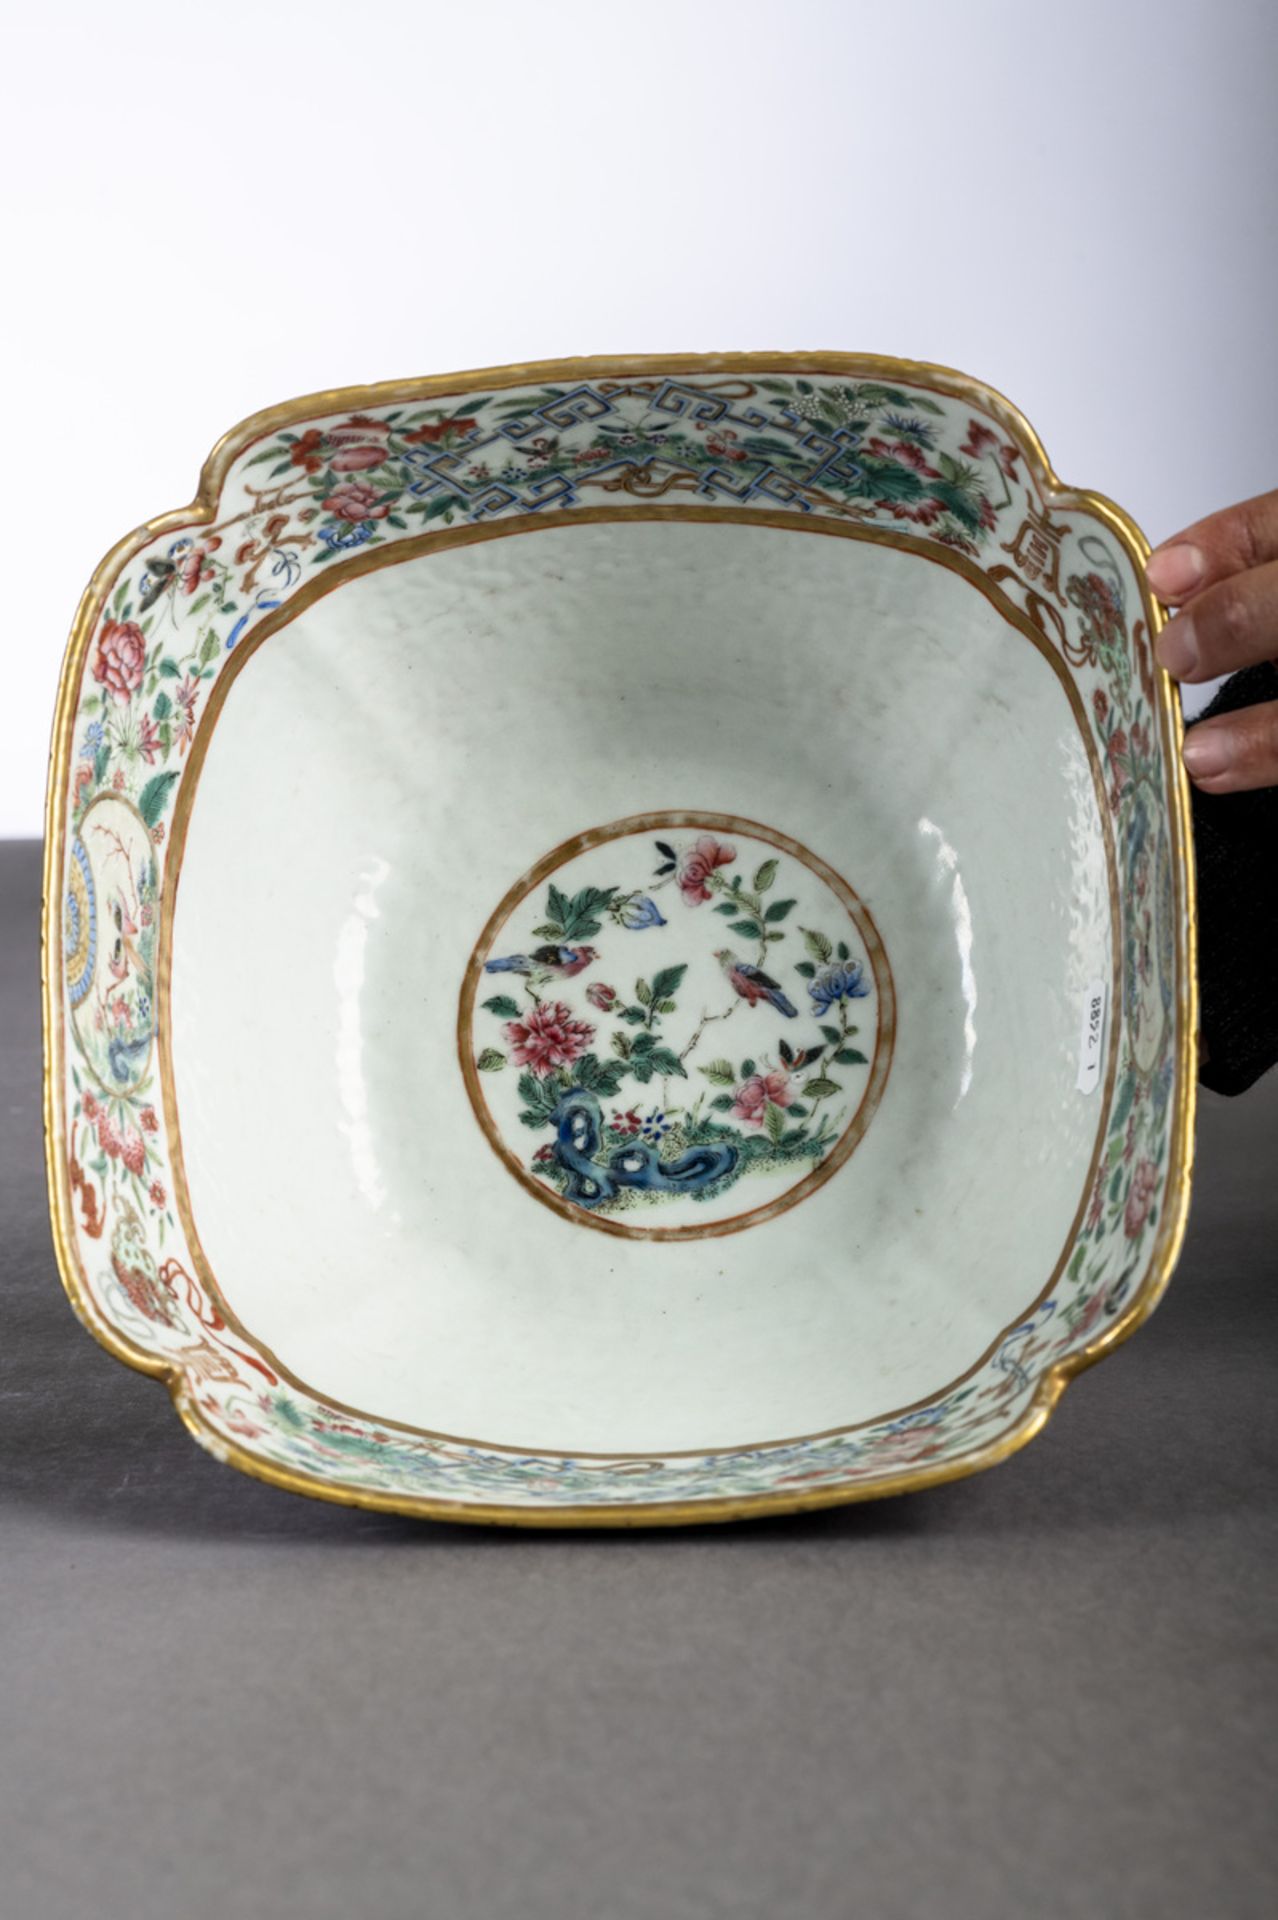 Lobed bowl in Chinese famille rose porcelain with gold rims 'characters', 19th century (11x24x24cm) - Bild 5 aus 5